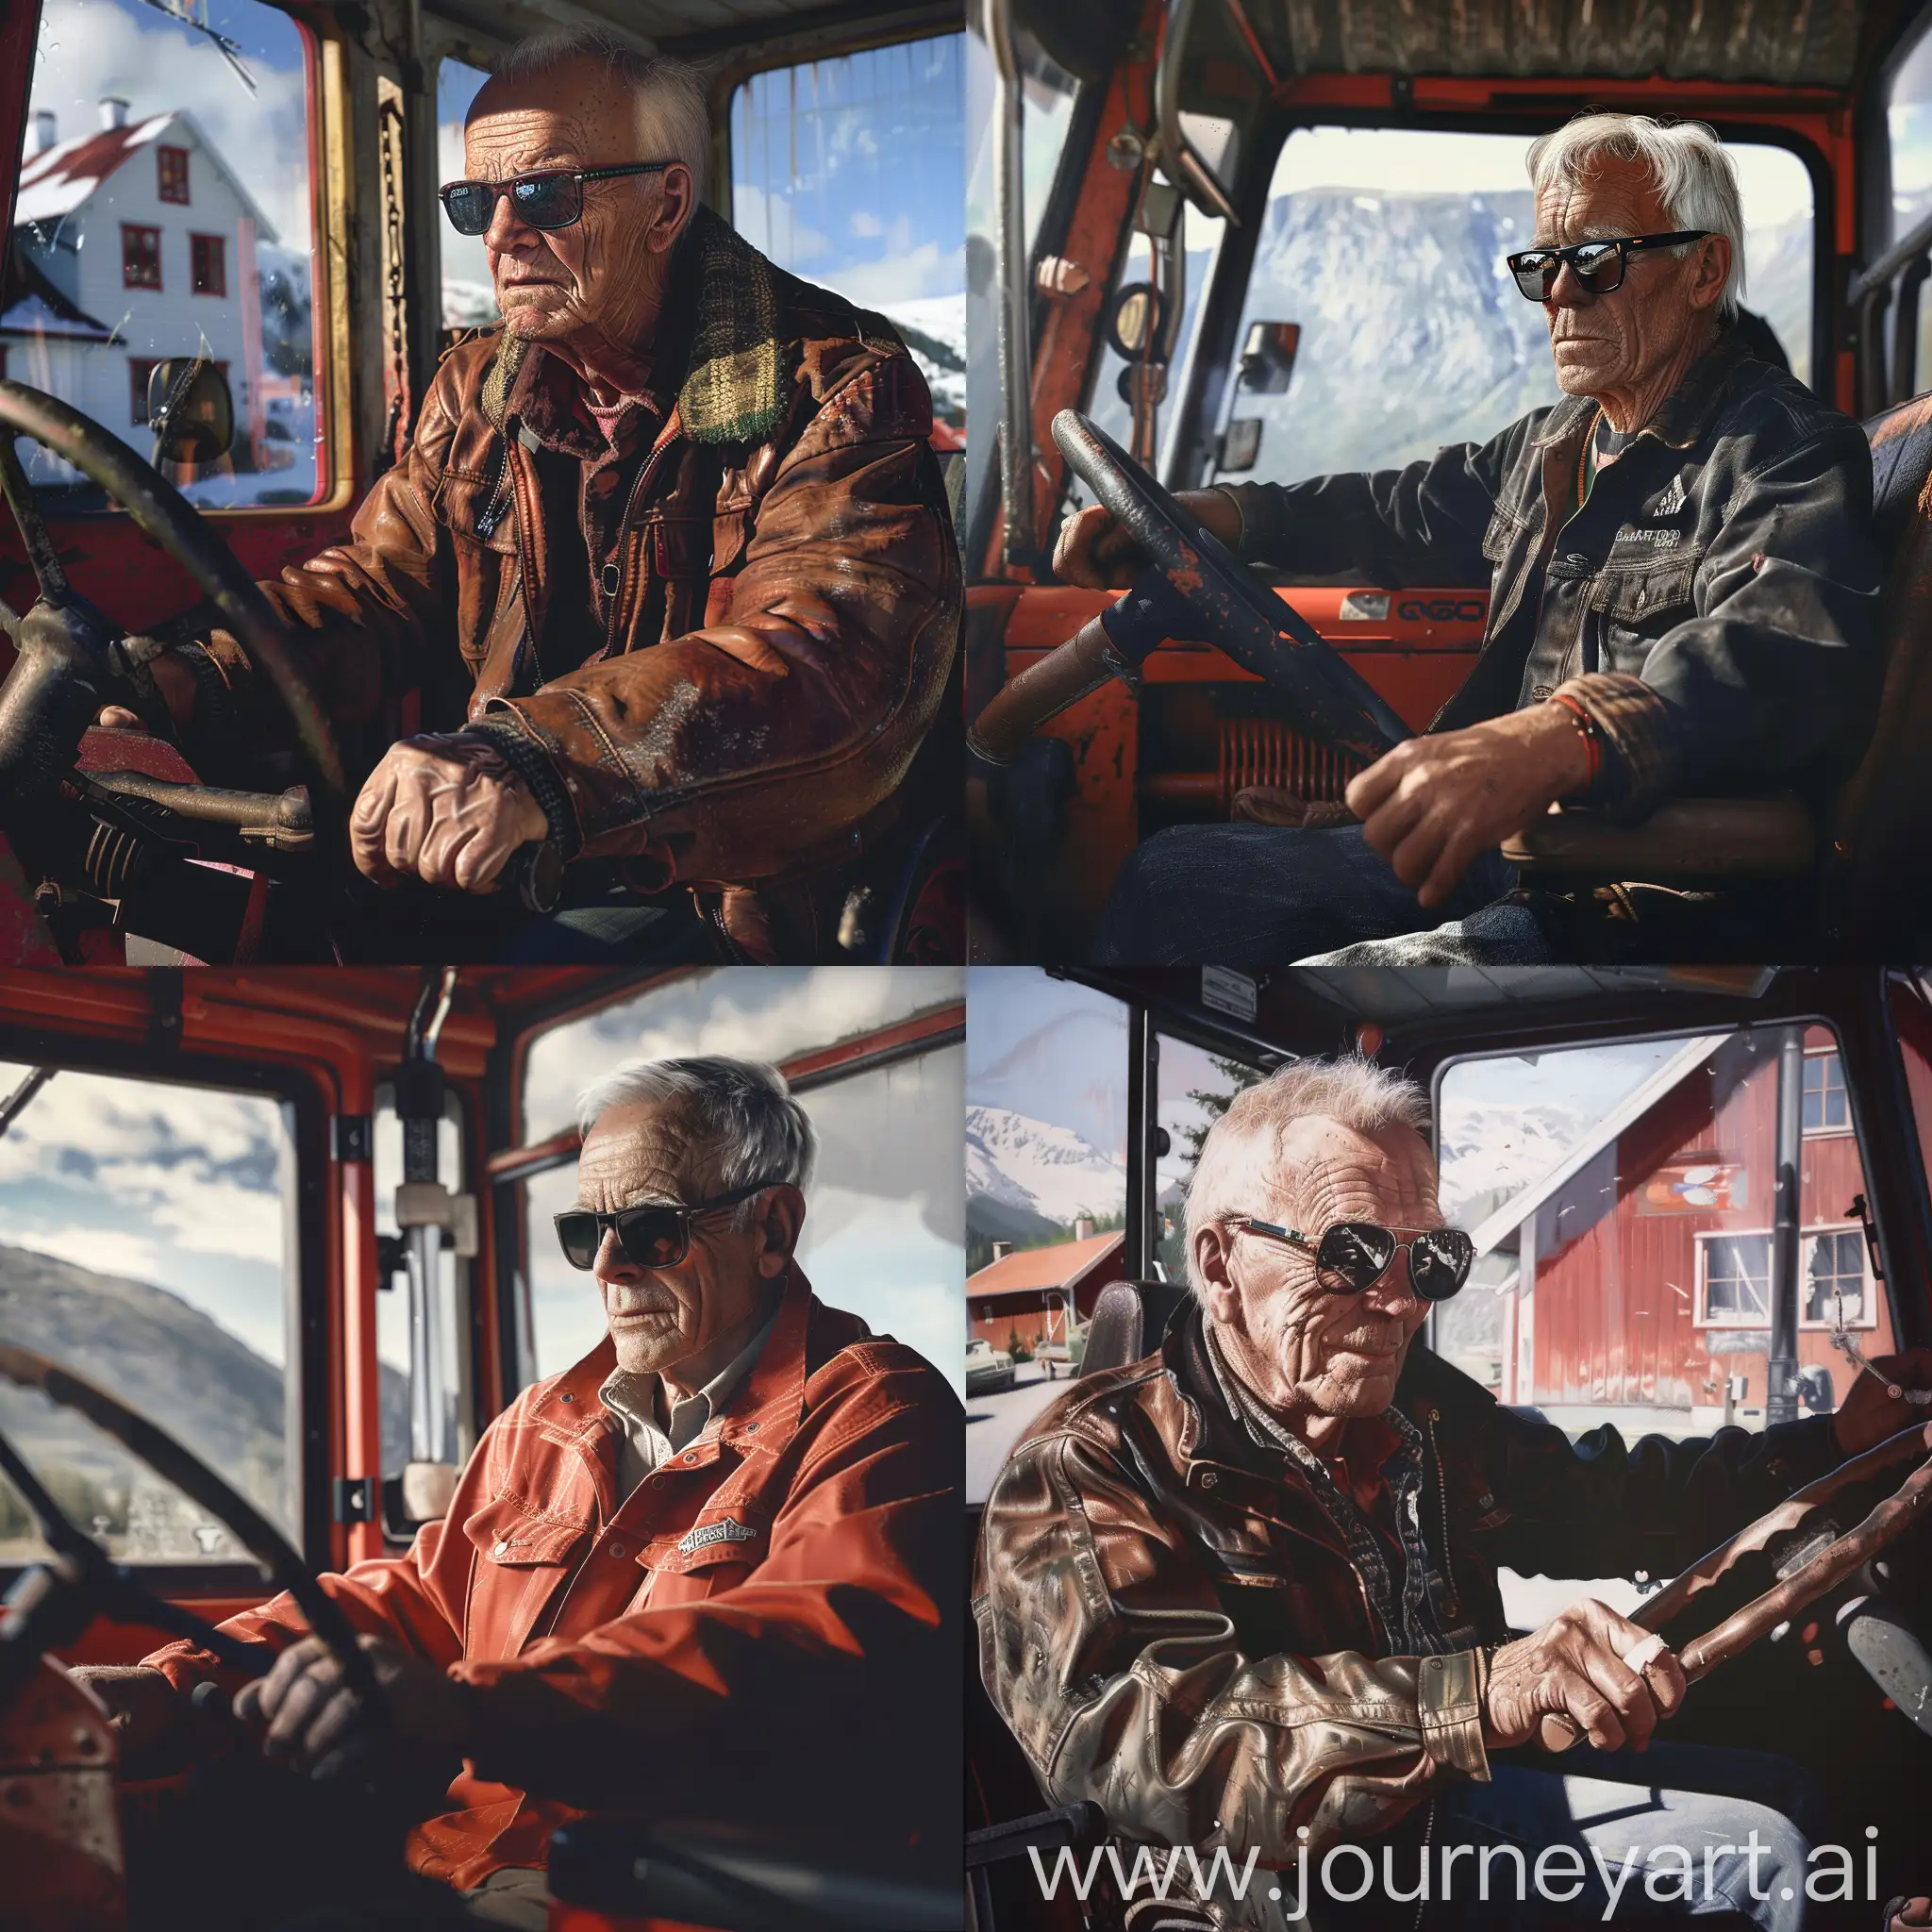 Old norwegian man with sunglasses on while driving a norwegian tractor. Hyper realistic